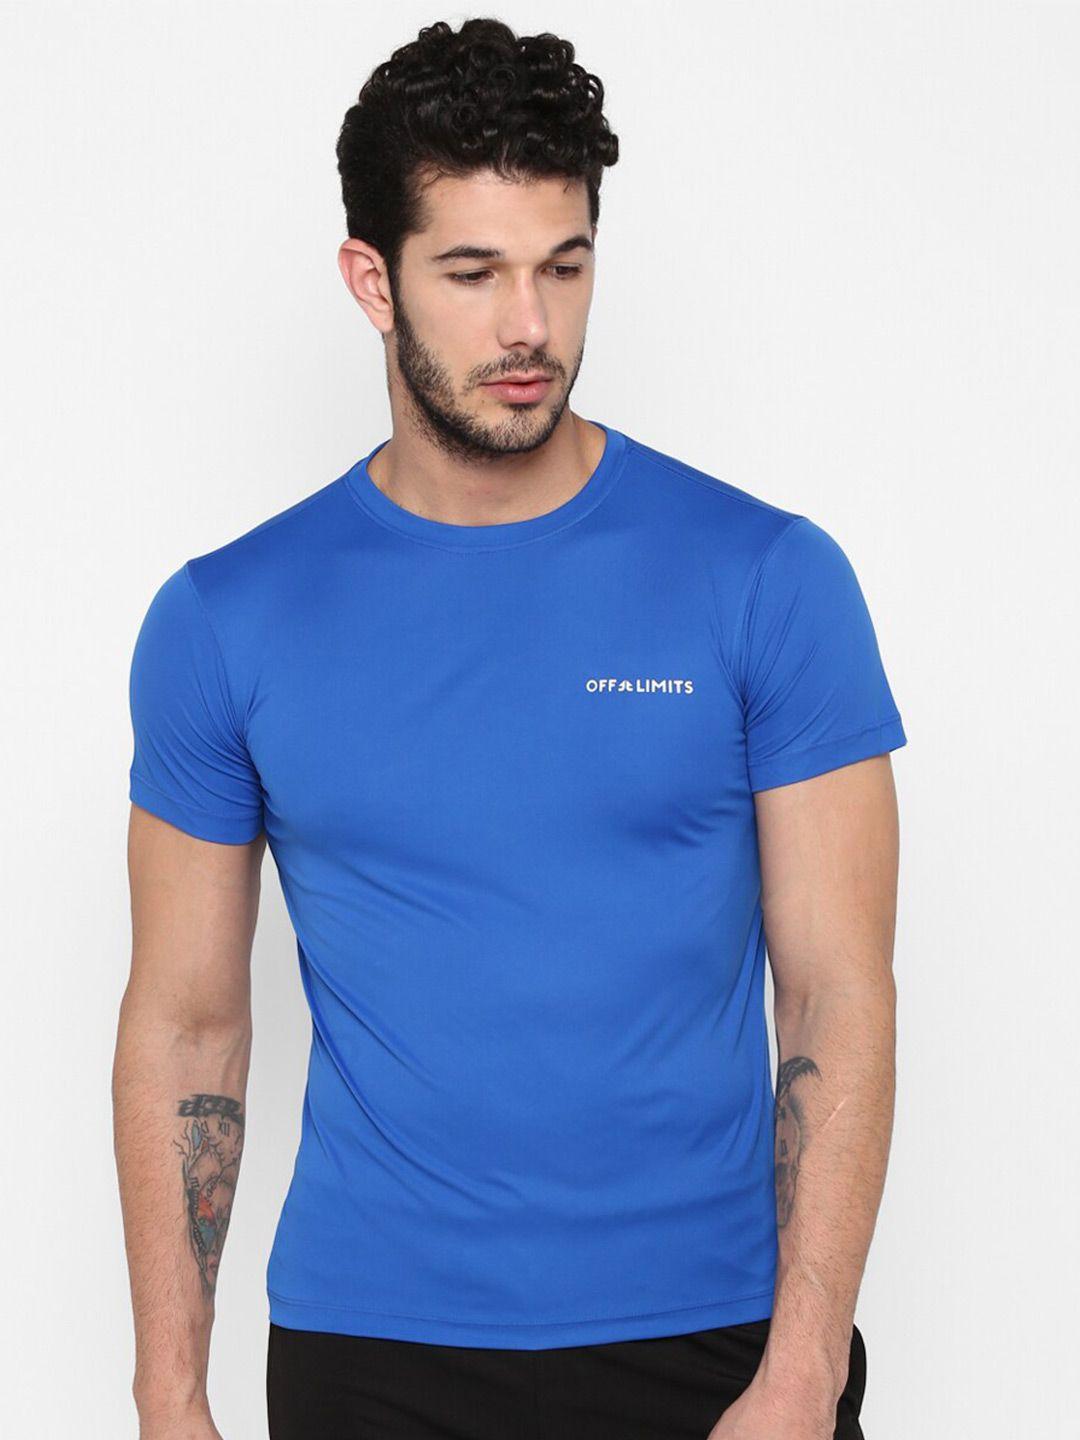 off limits round neck rapid-dry & anti microbial cotton sports t-shirt